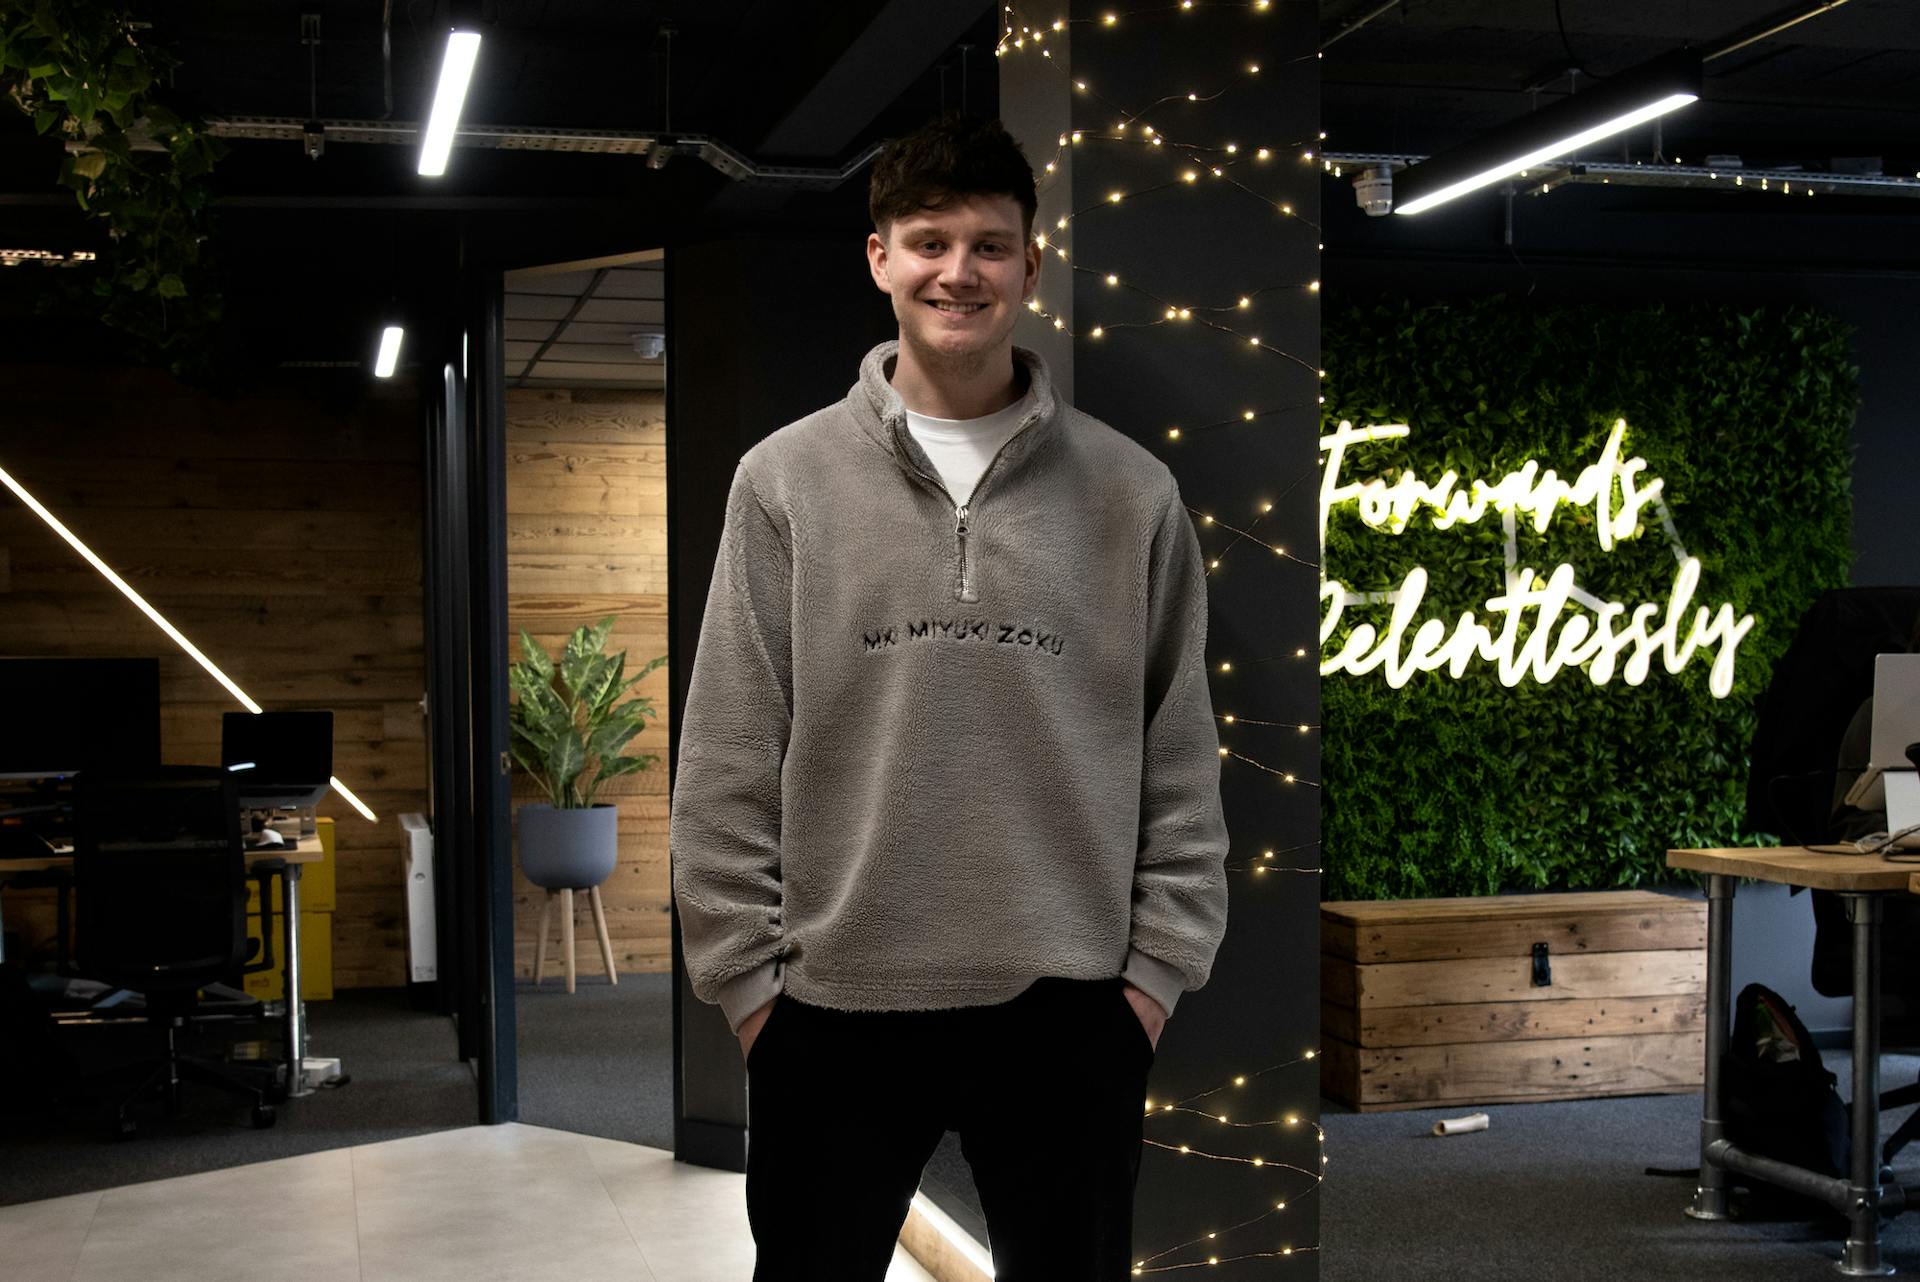 Welcome to Josh Dodd, our new Agency Marketing Manager here at Show + Tell